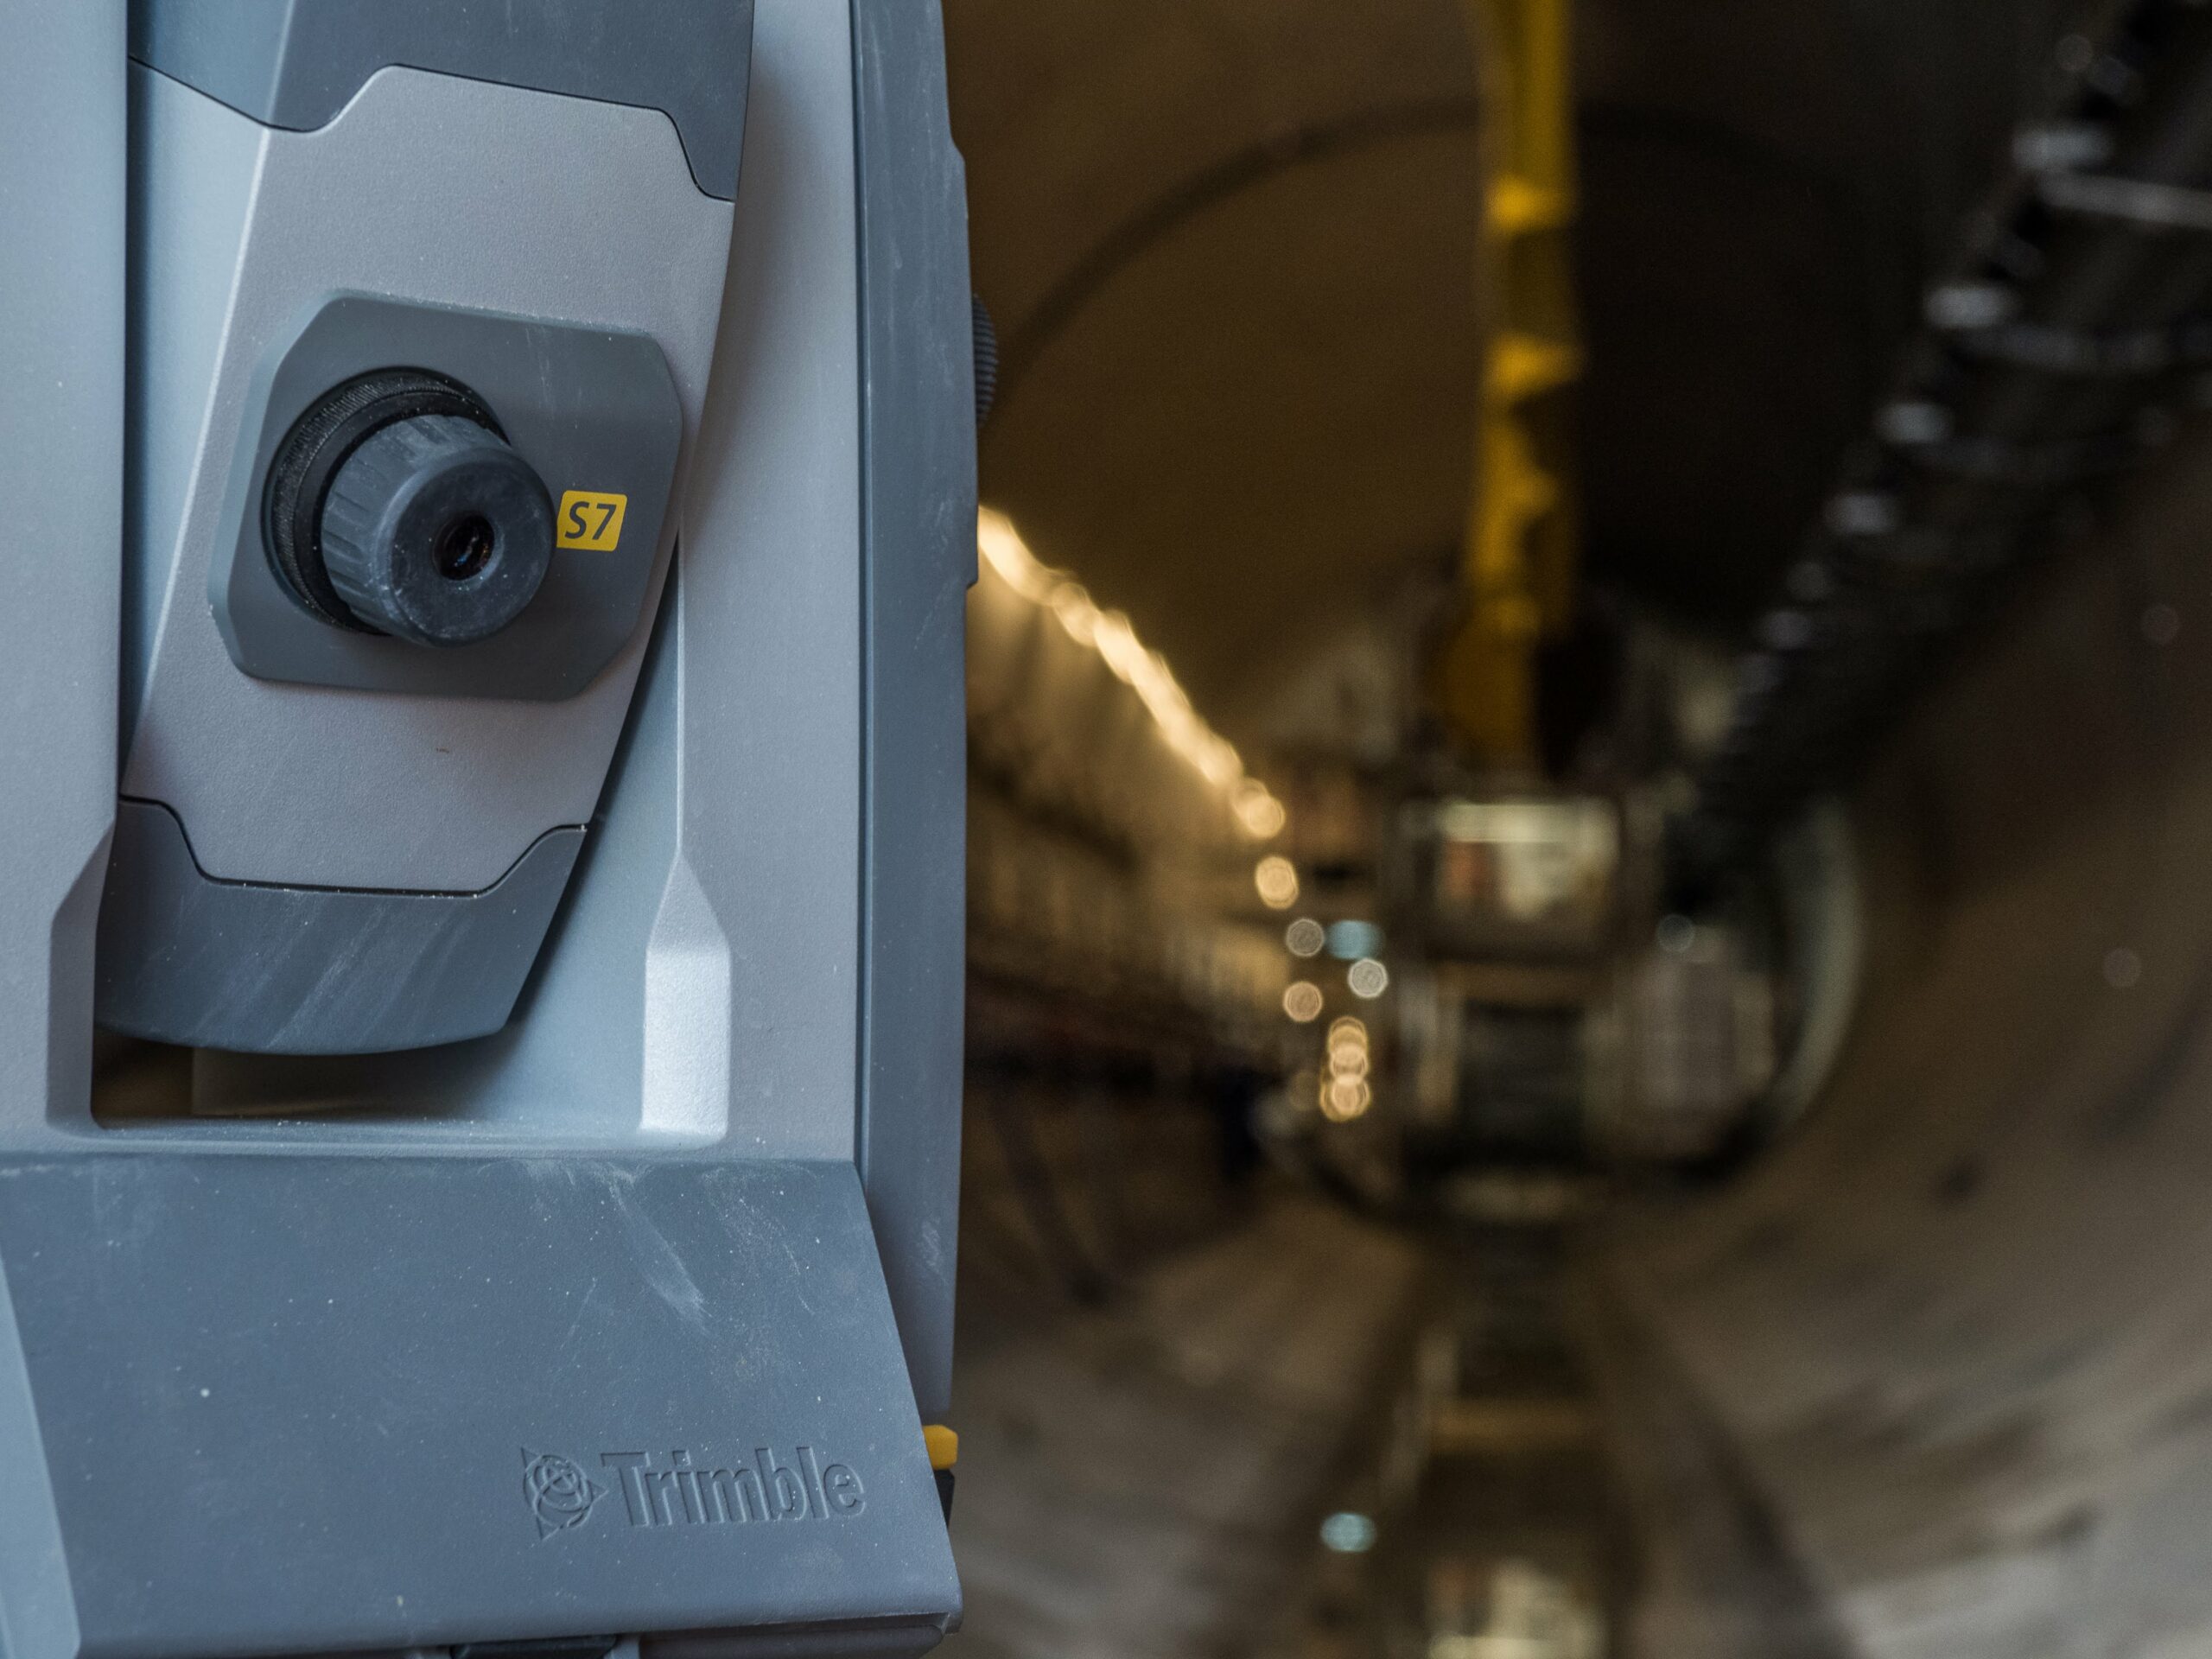 A robotic total station provides the high-precision measurements needed for tunnel construction, monitoring and quality control.